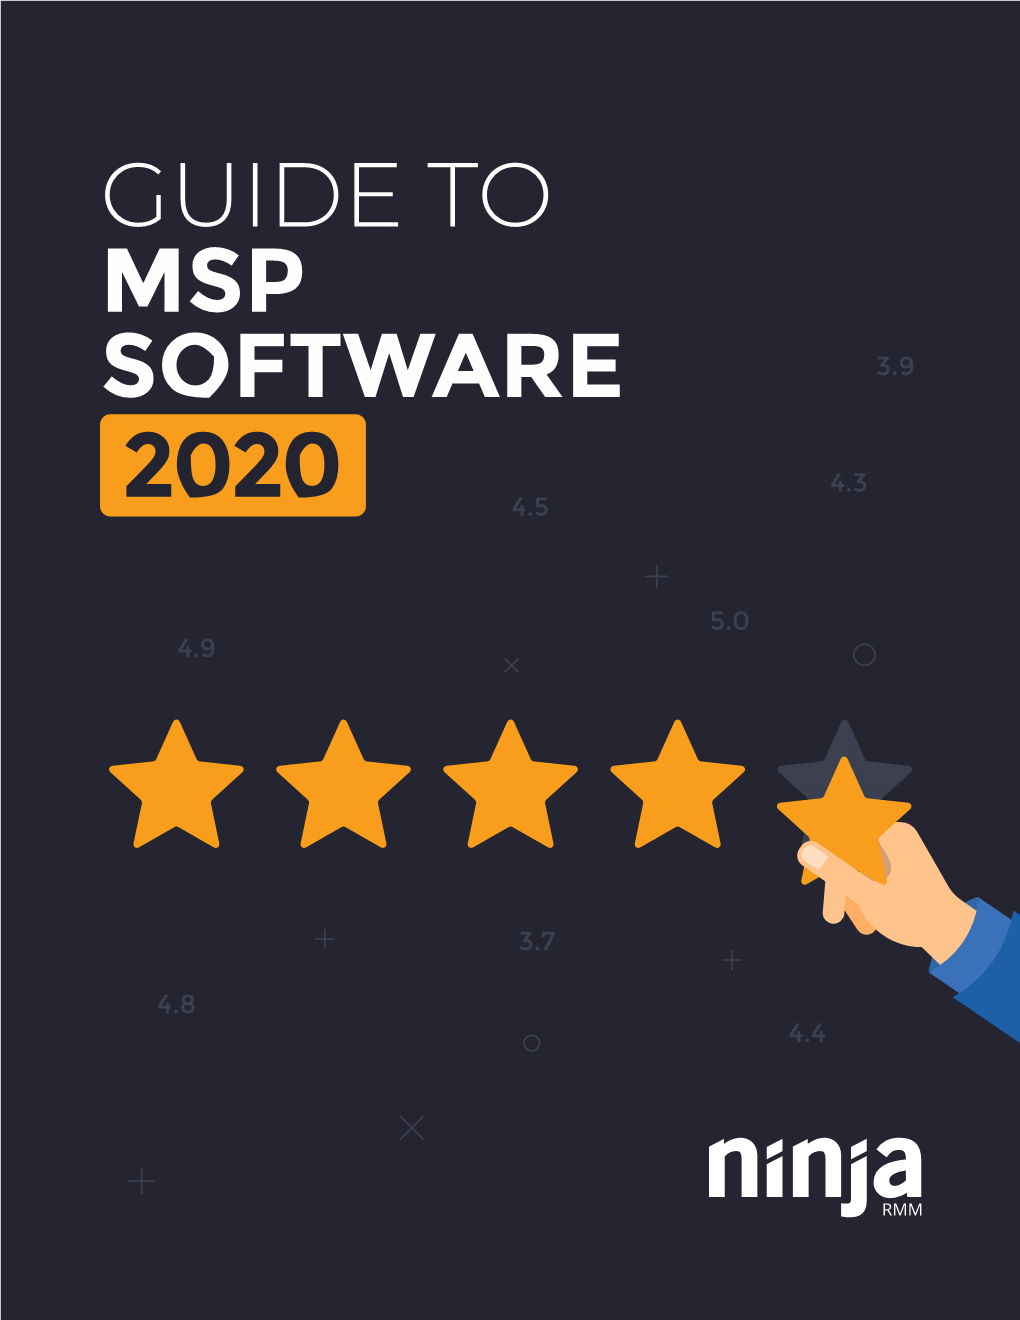 Guide to Msp Software 3.9